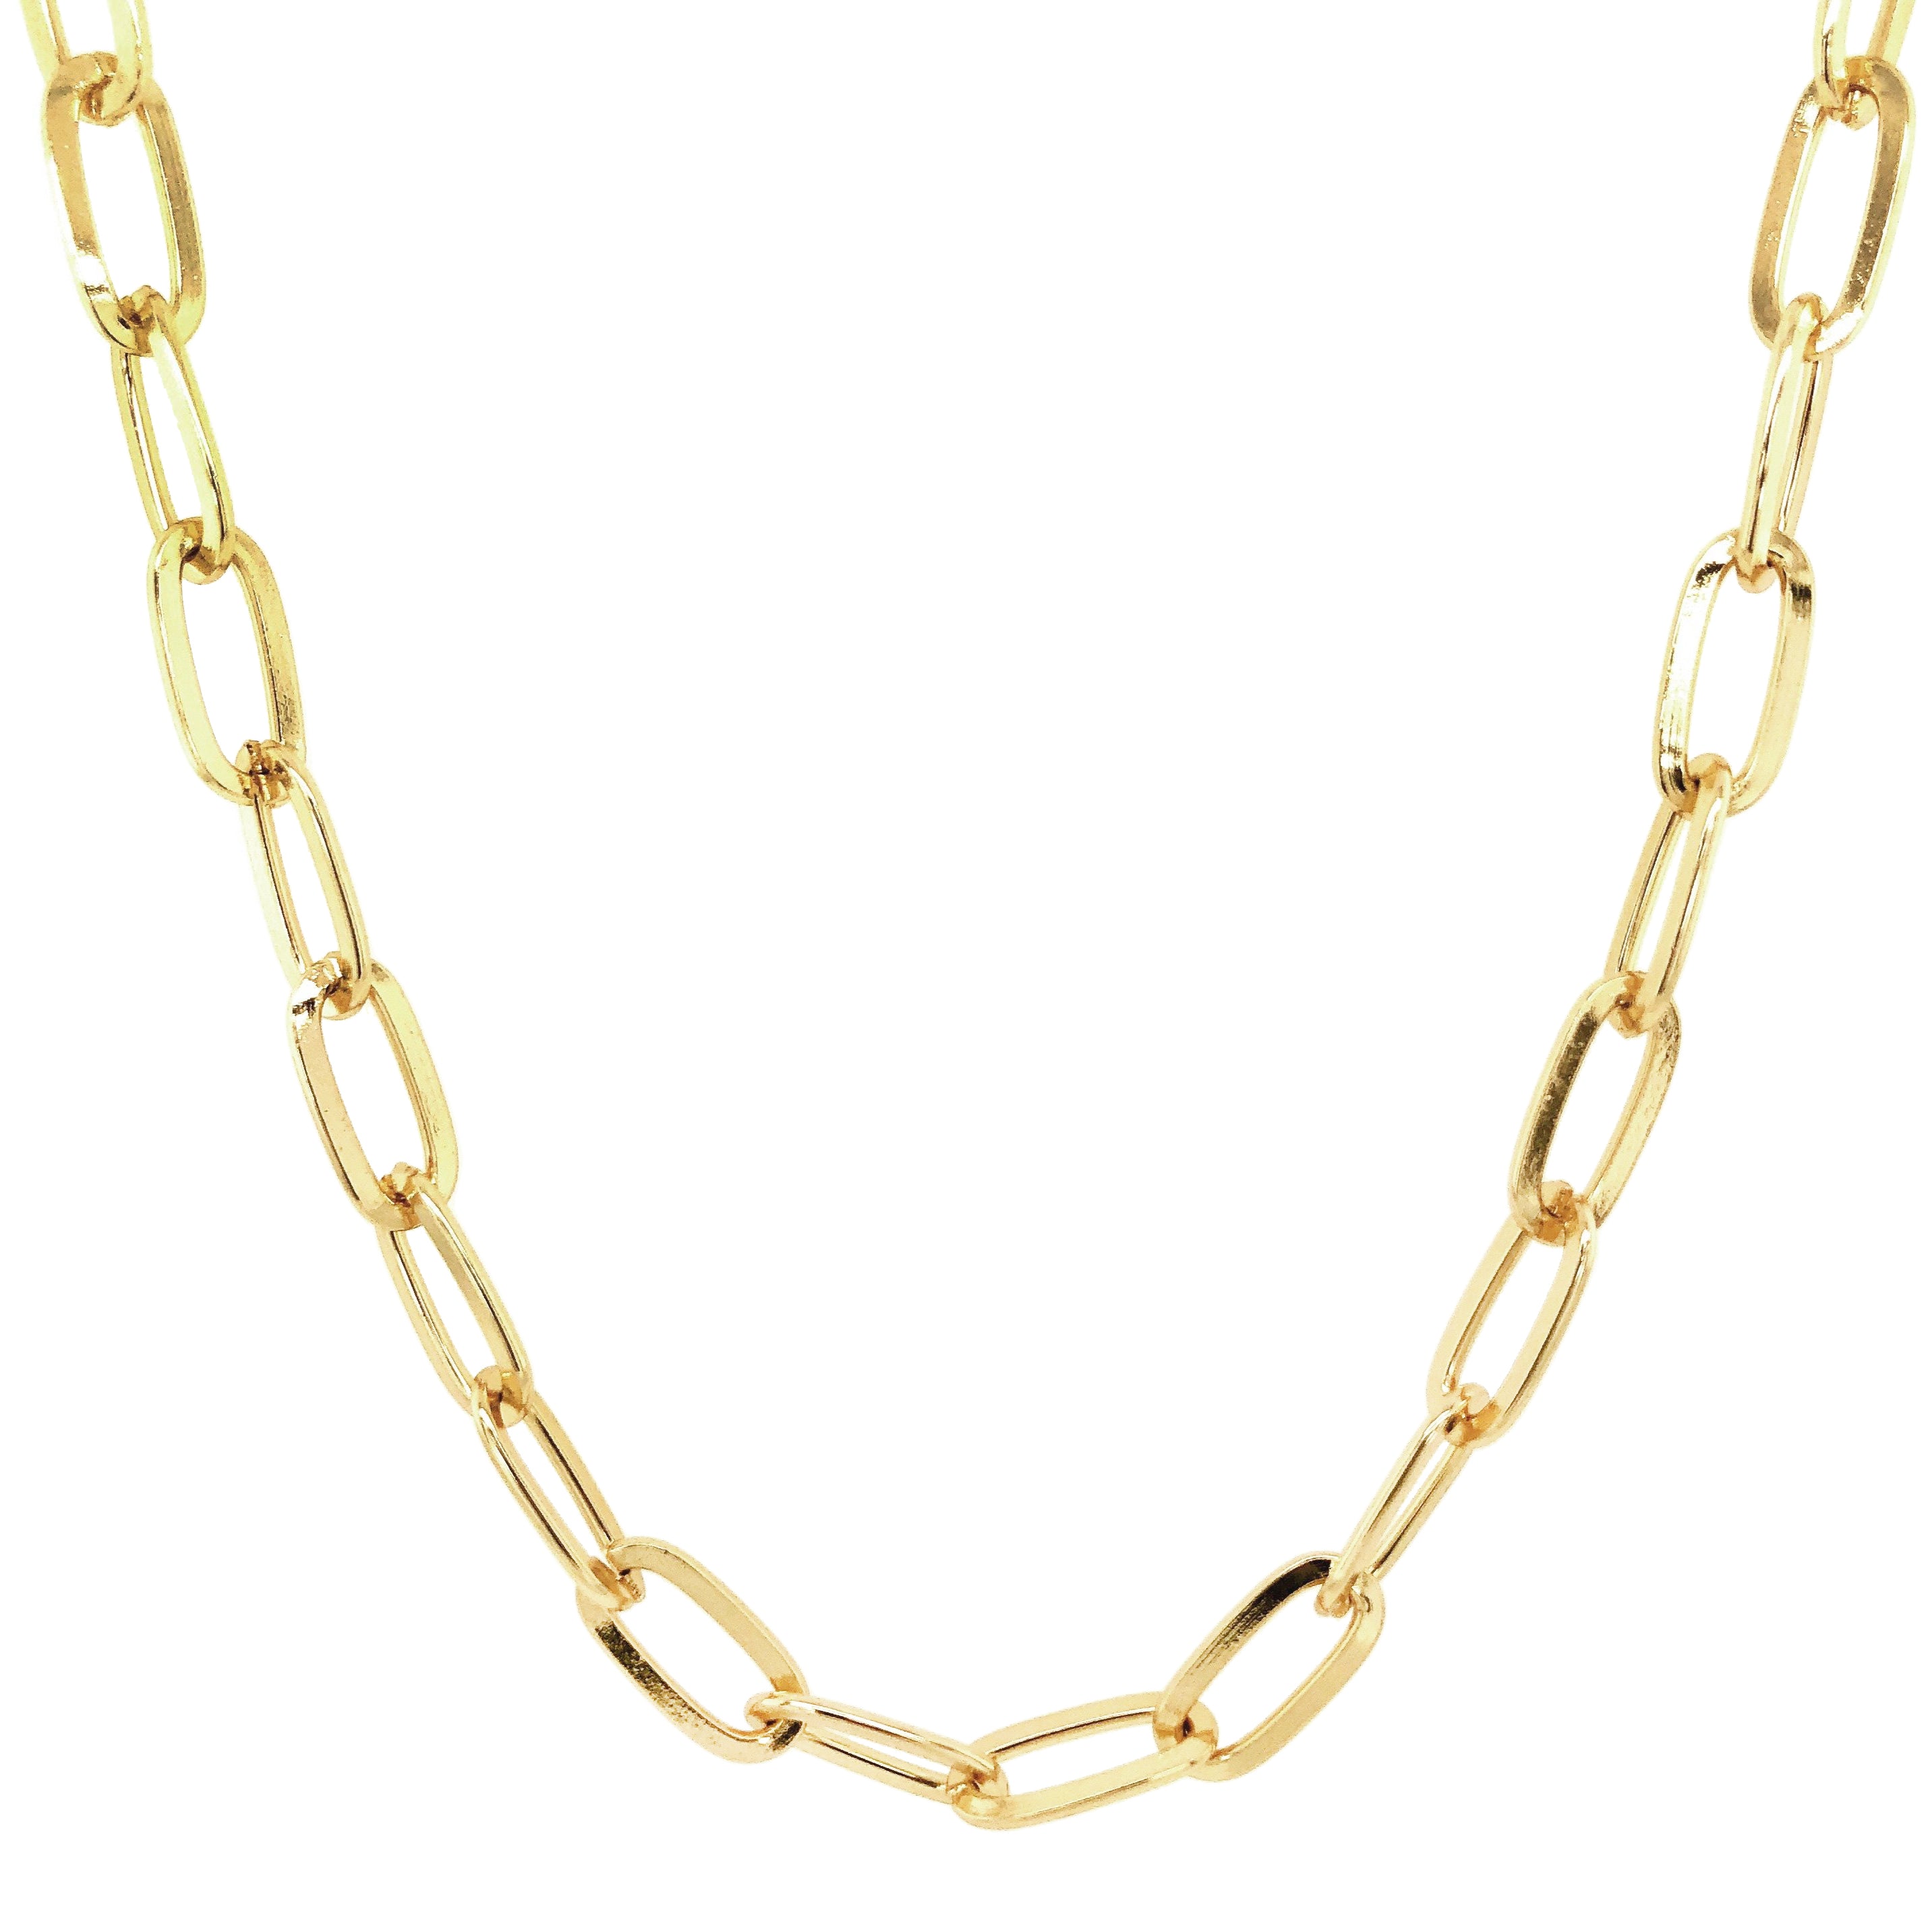 The Jen Necklace, Chunky Chain Necklace, Paperclip Chain Necklace, Gold Plated Necklace